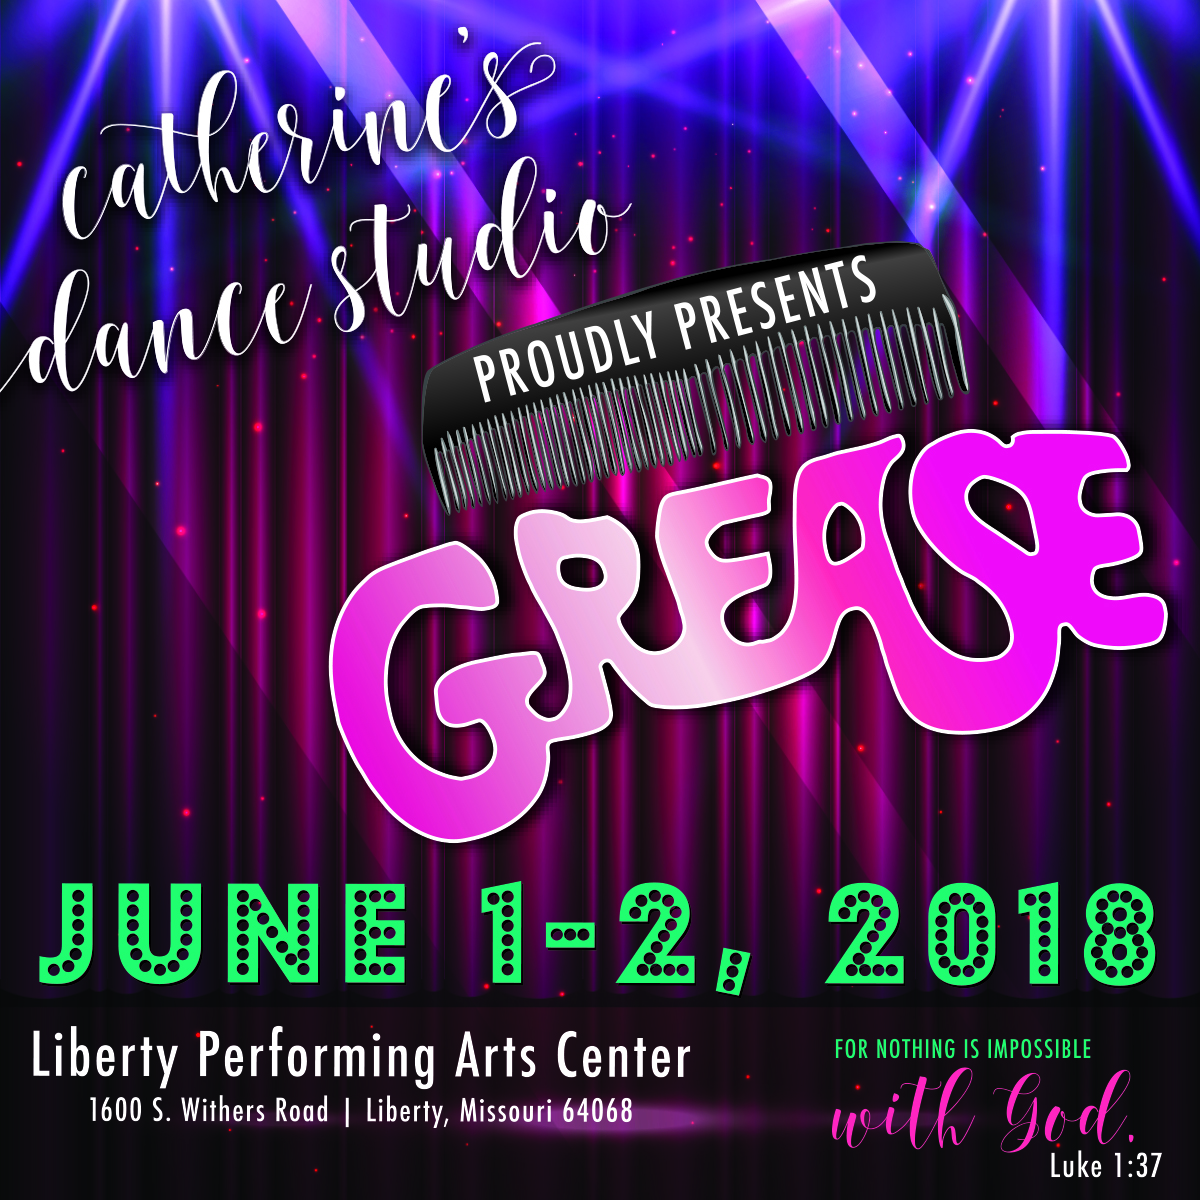 It's almost time for Catherine's Dance Studio's Spring Grease Recital.